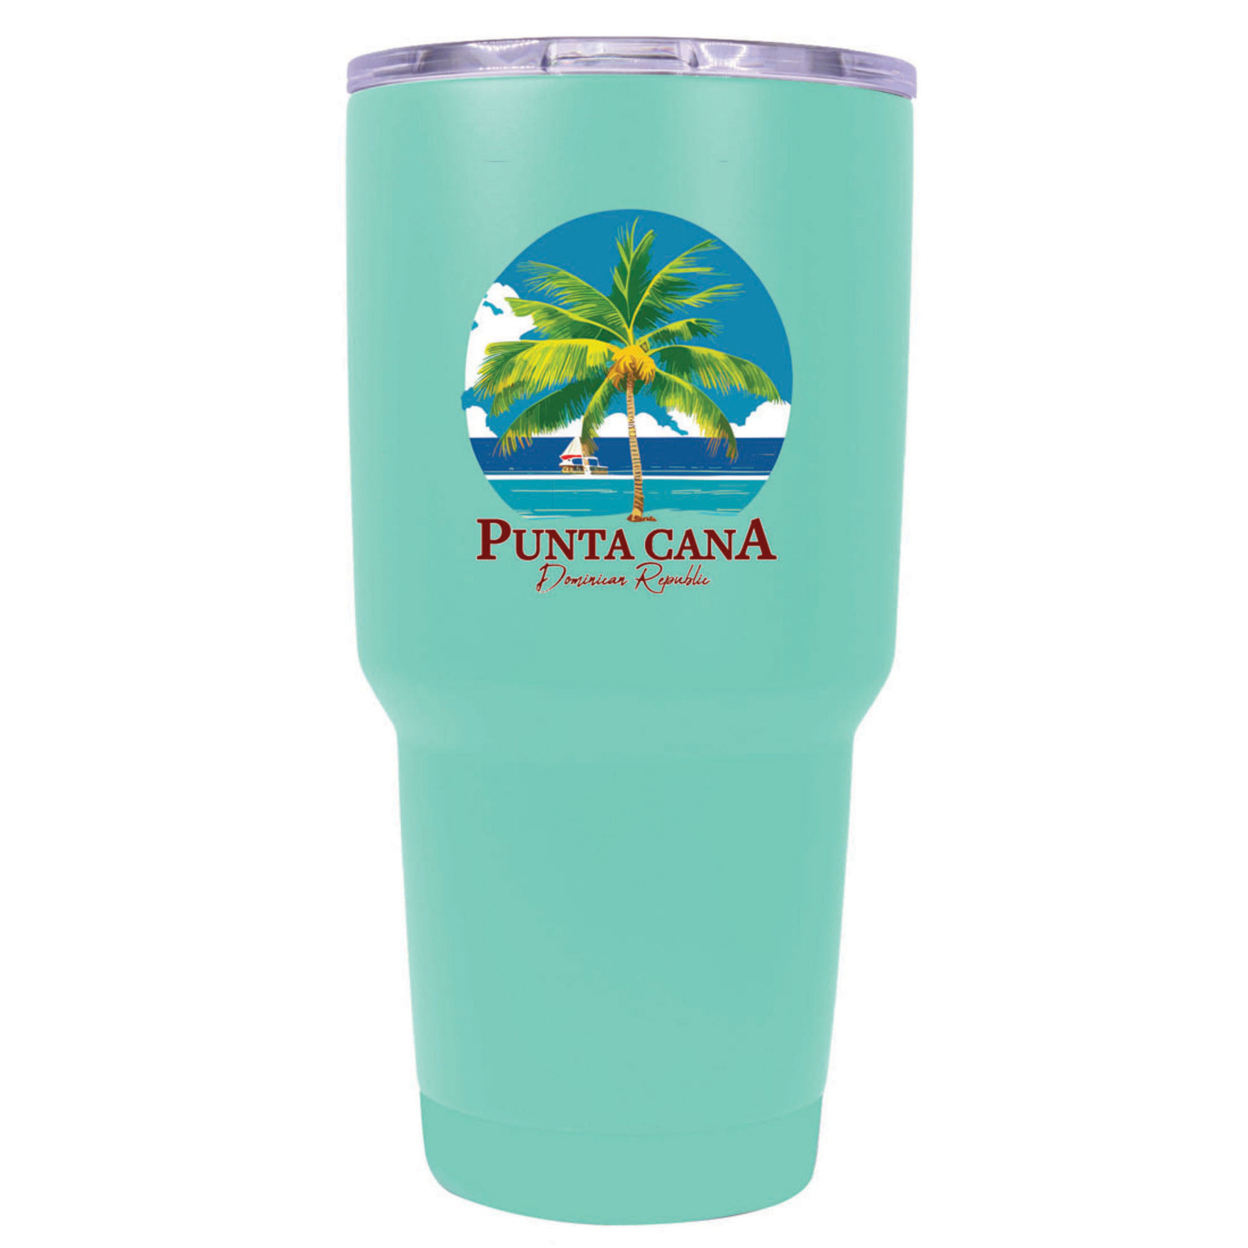 Punta Cana Dominican Republic Souvenir 24 Oz Insulated Stainless Steel Tumbler - Navy, PALM